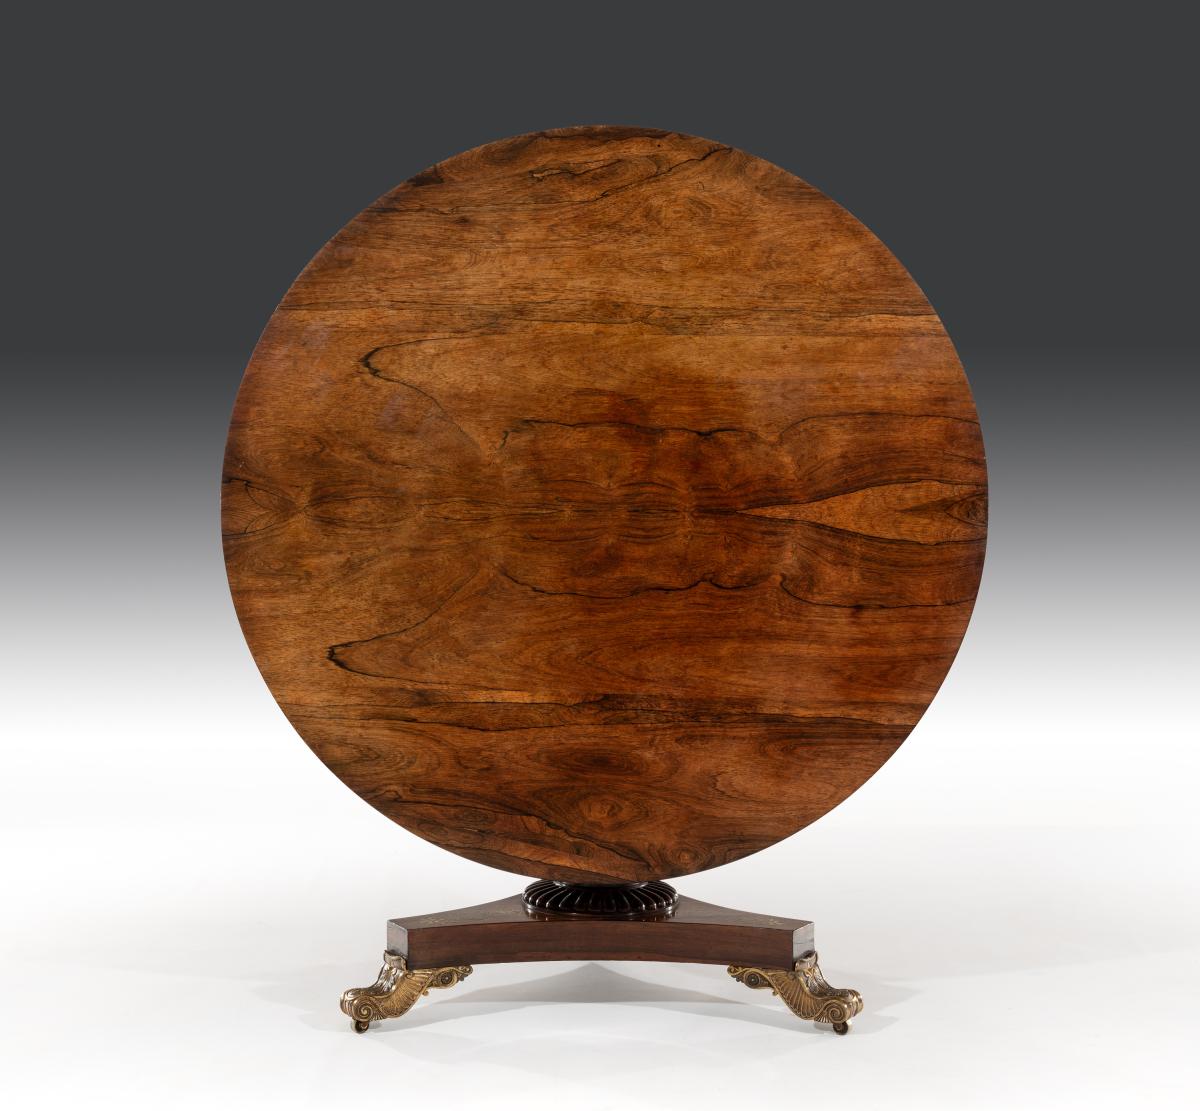 19th Century Rosewood and Brass Inlaid Centre Table